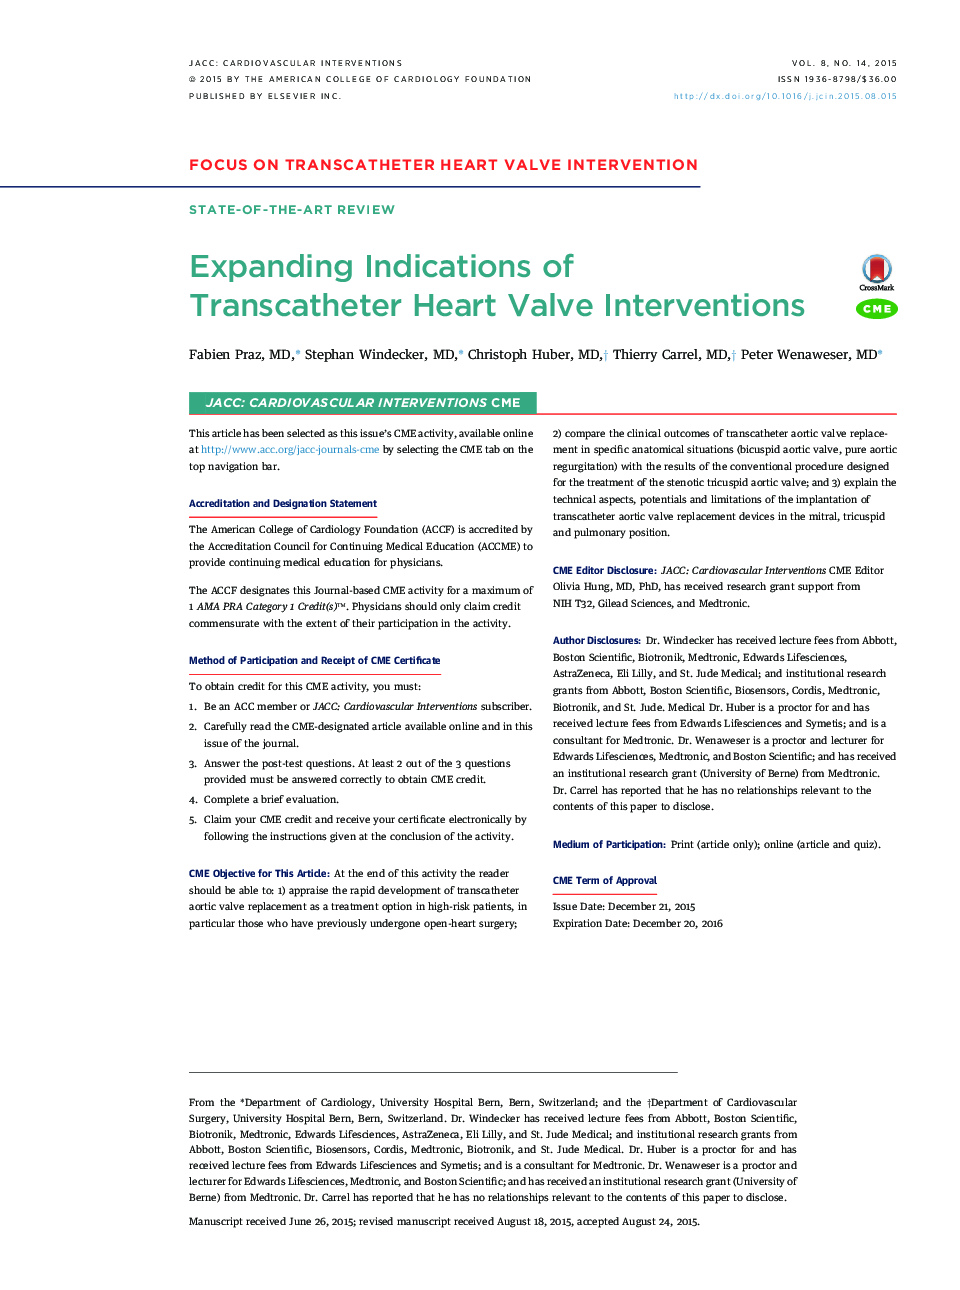 Expanding Indications of Transcatheter Heart Valve Interventions 